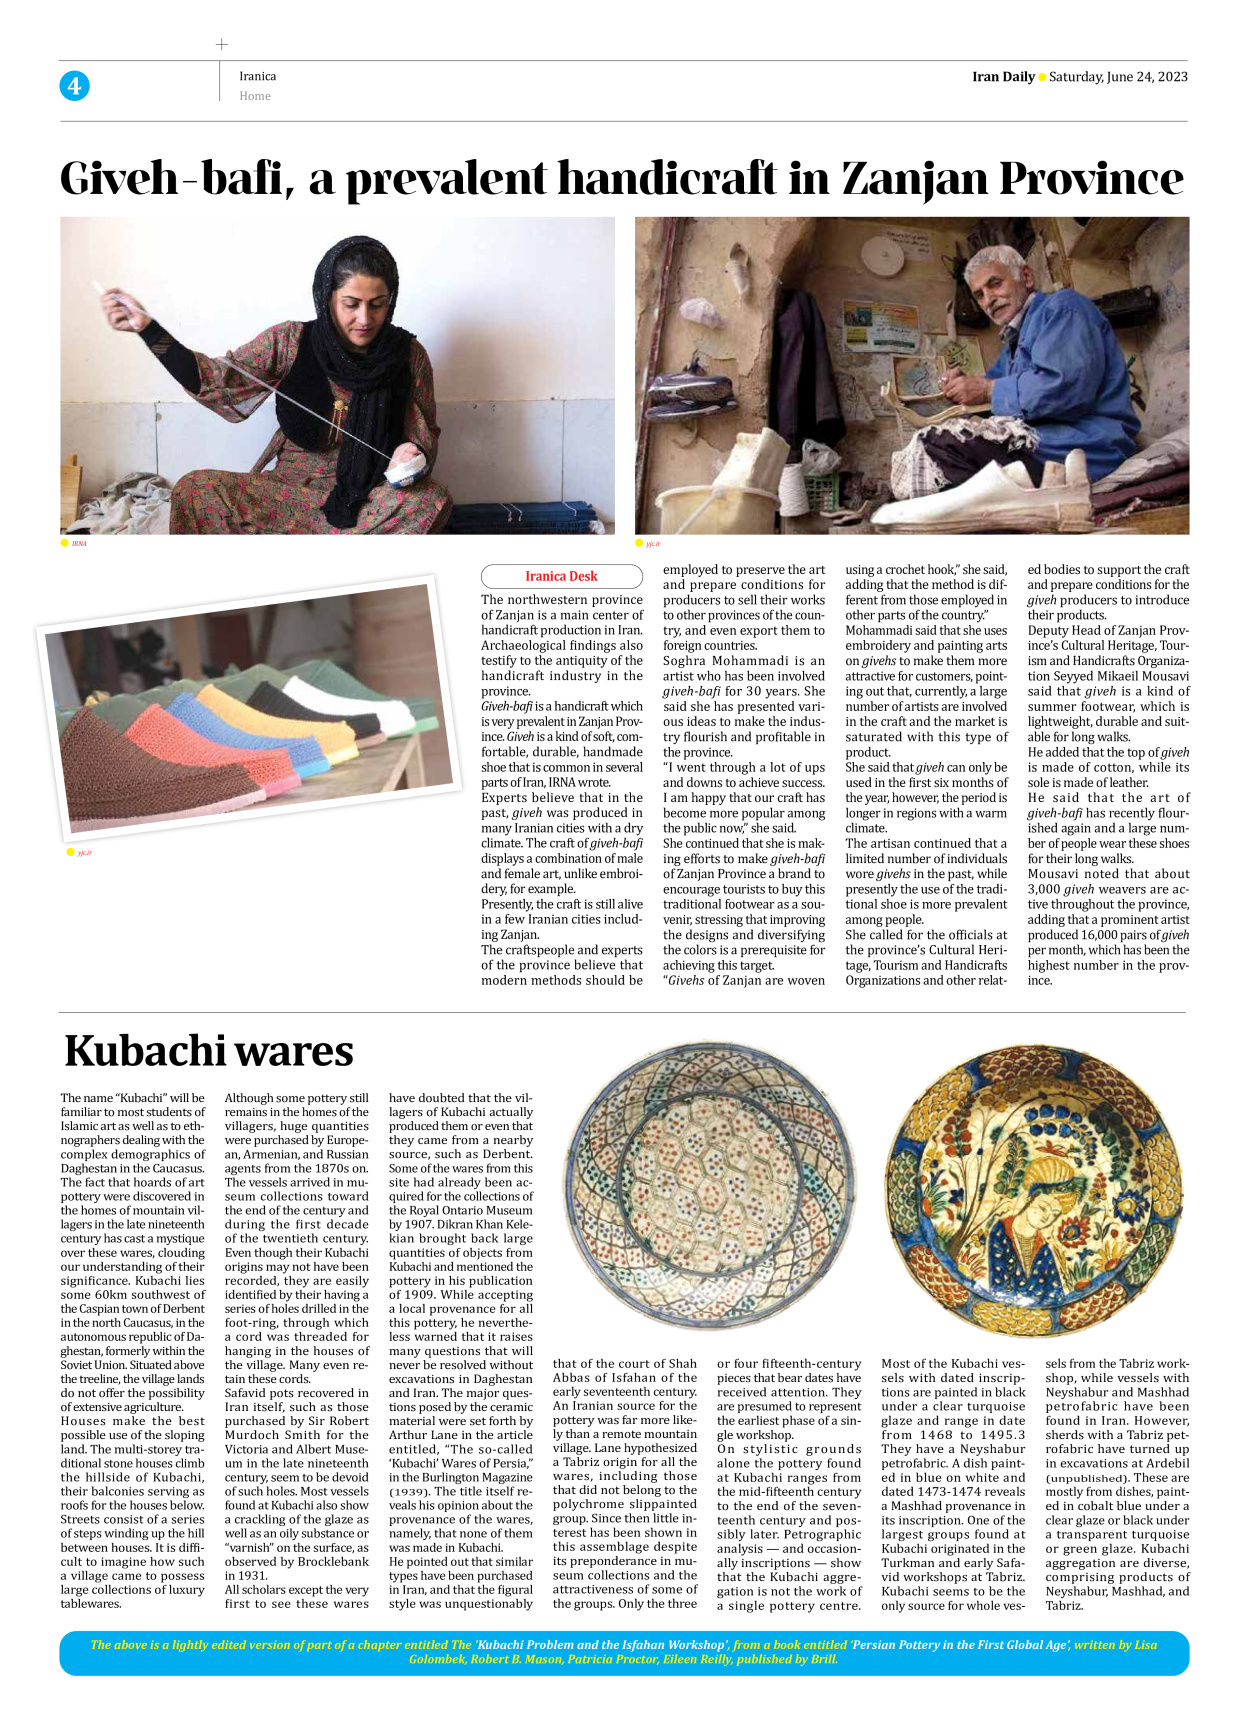 Iran Daily - Number Seven Thousand Three Hundred and Twenty Two - 24 June 2023 - Page 4